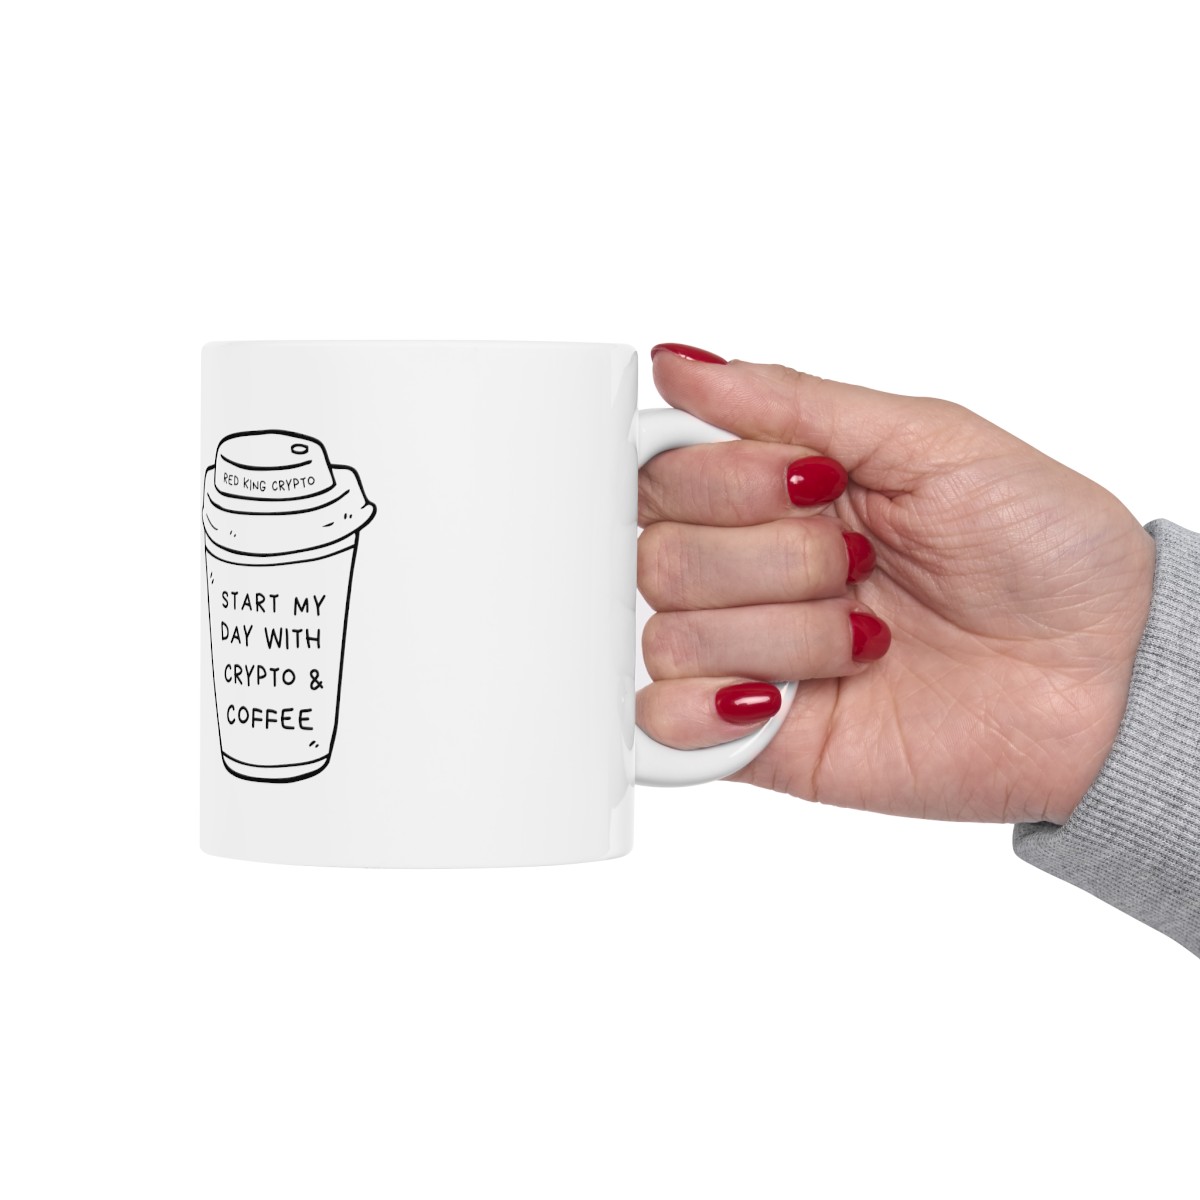 Start my Day with Crypto and Coffee - Ceramic Mug 11oz product thumbnail image